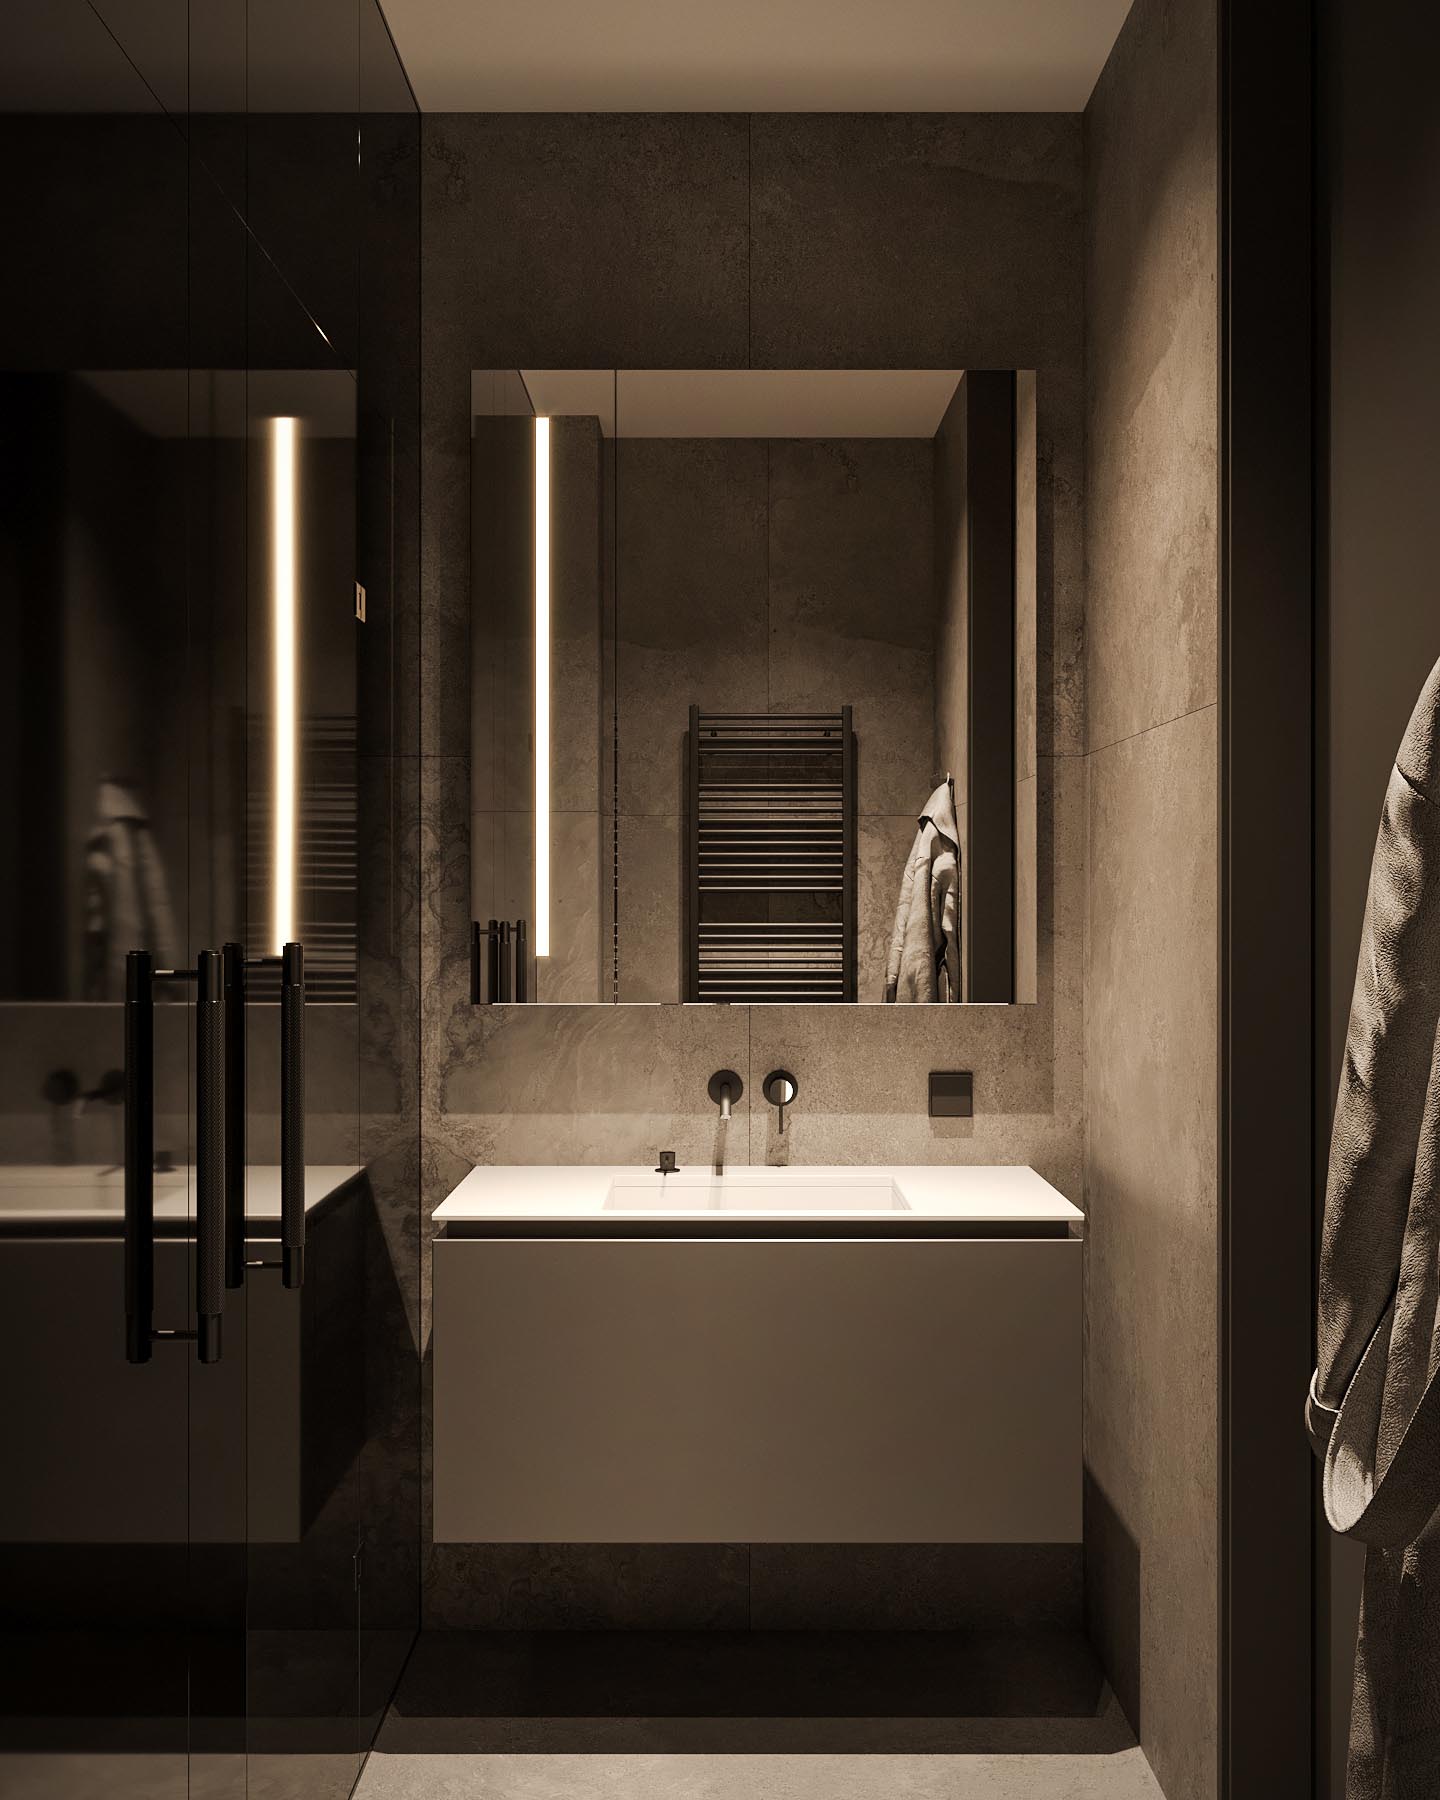 A modern bathroom with a white vanity, large format tiles, and black accents.